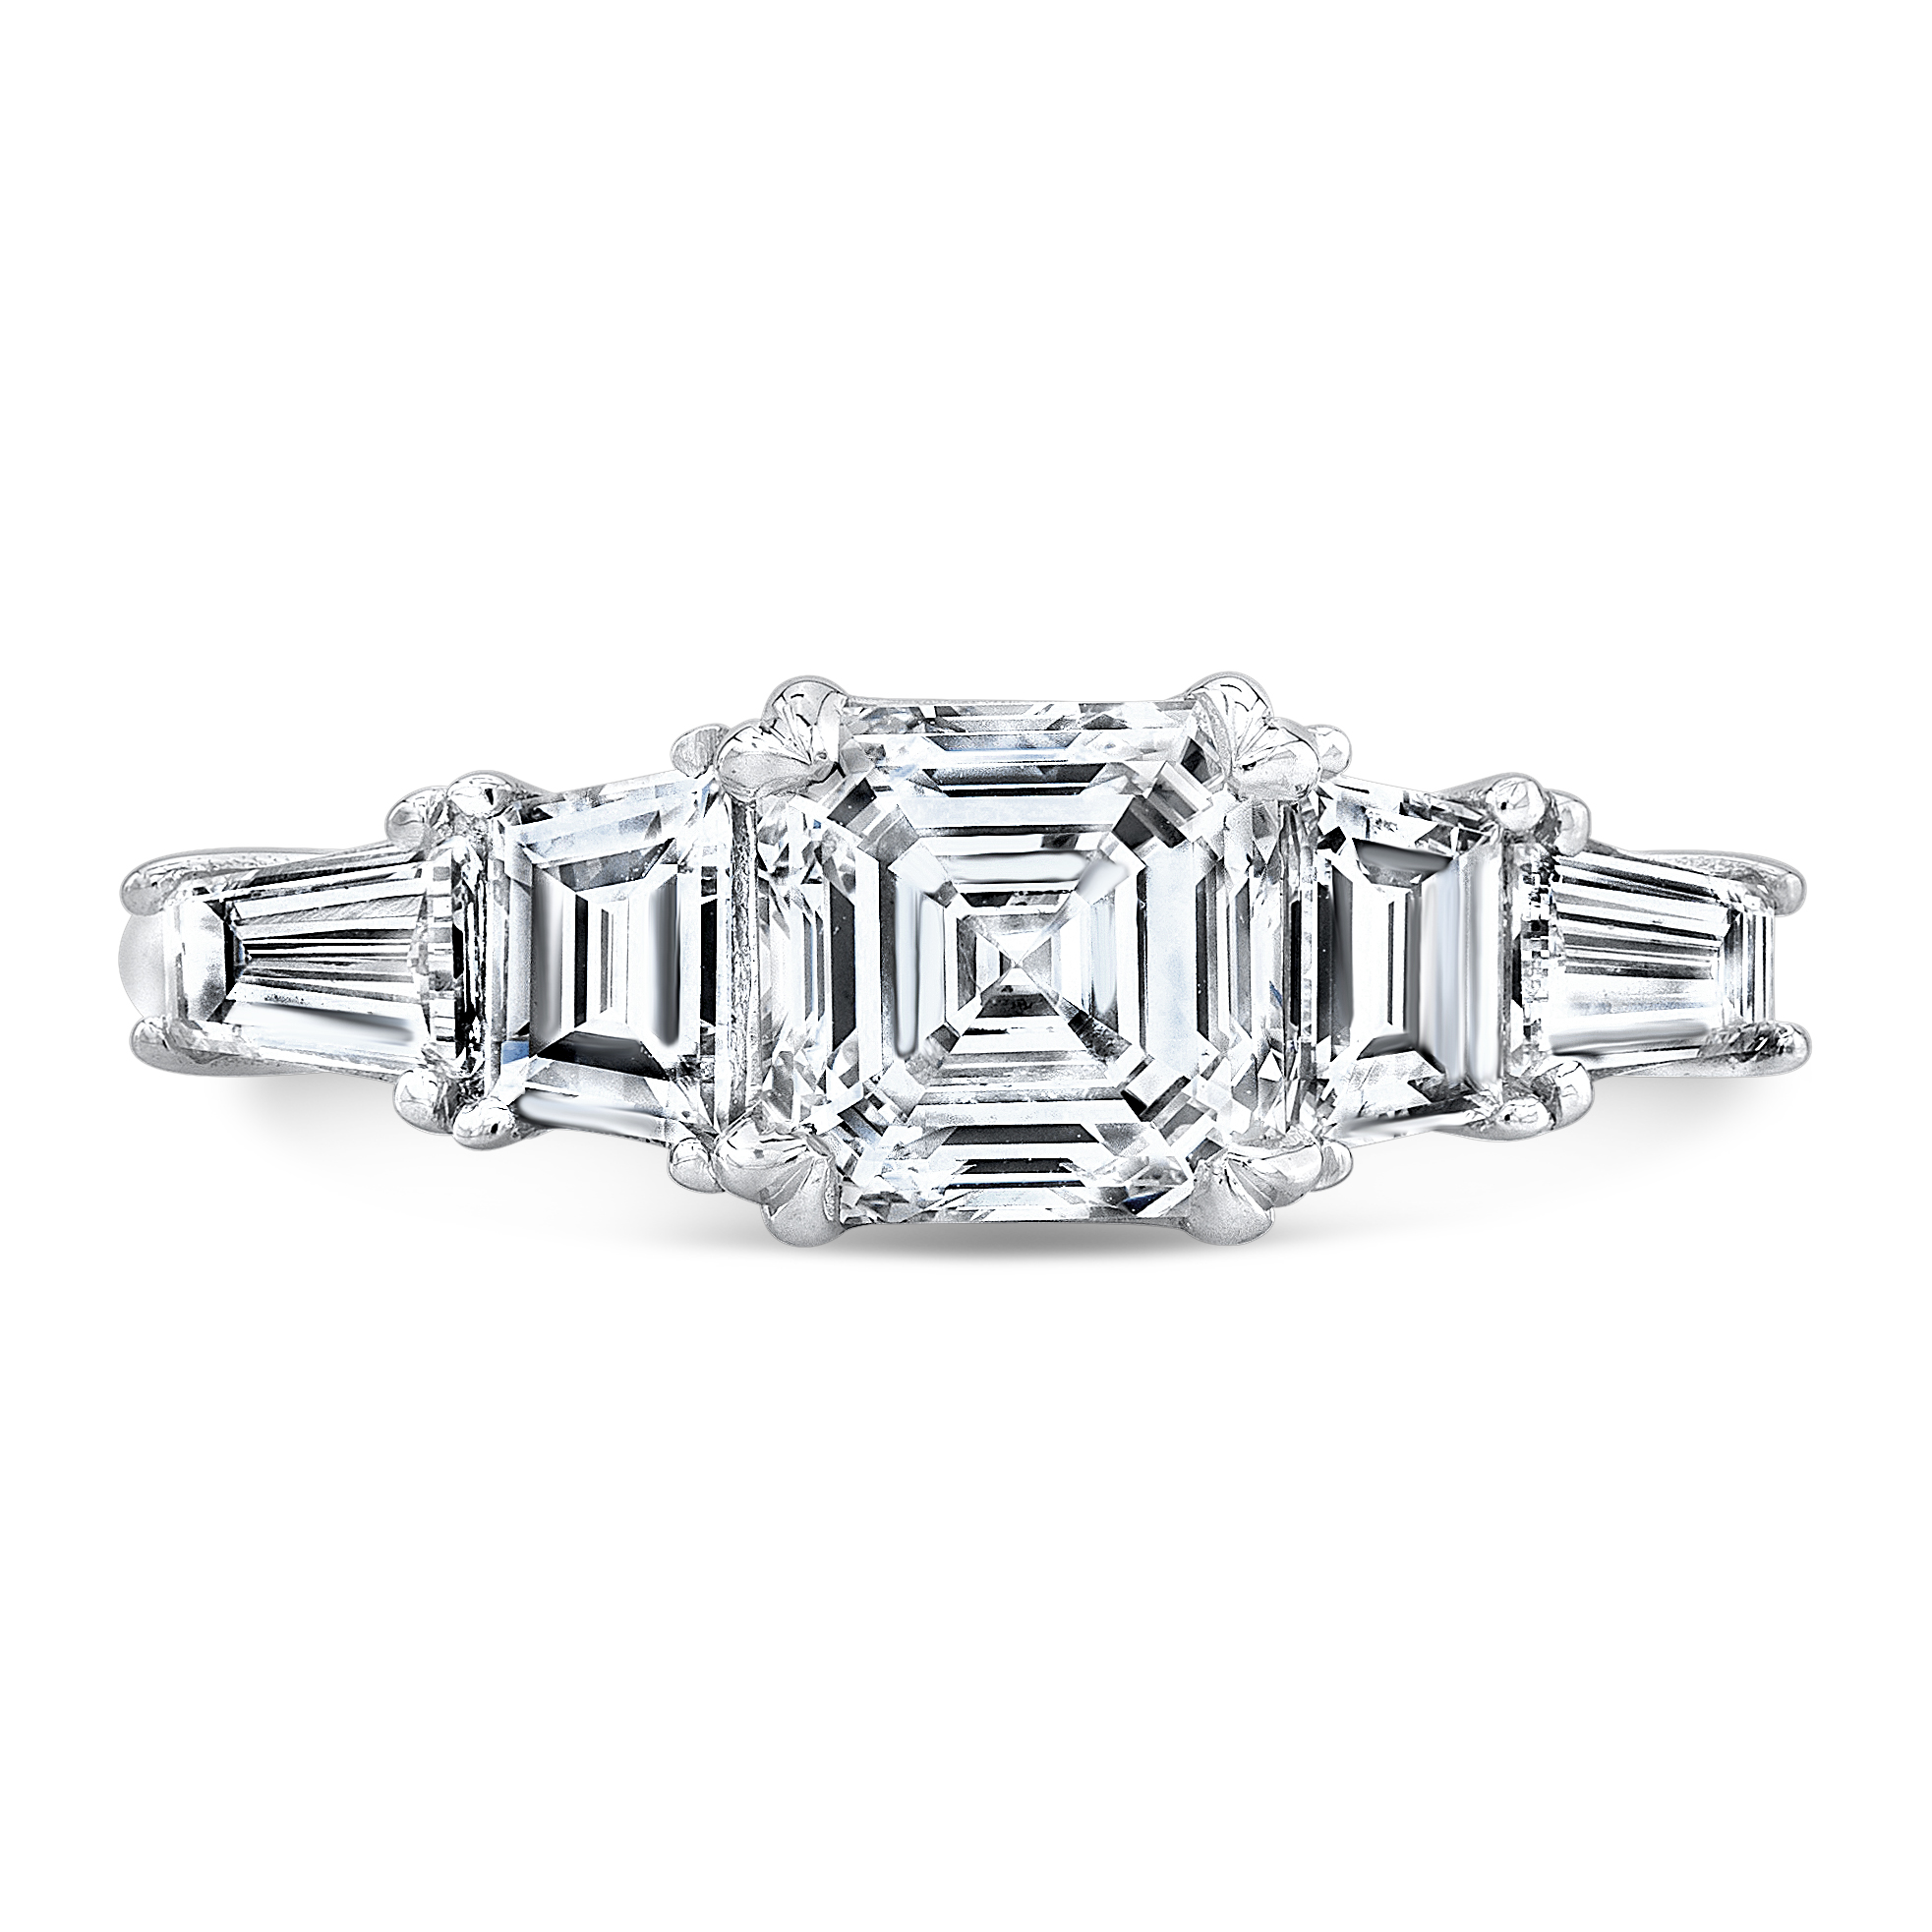 ASSCHER CUT DIAMOND RING WITH TAPER BAGUETTE SIDE STONES IN PLATINUM